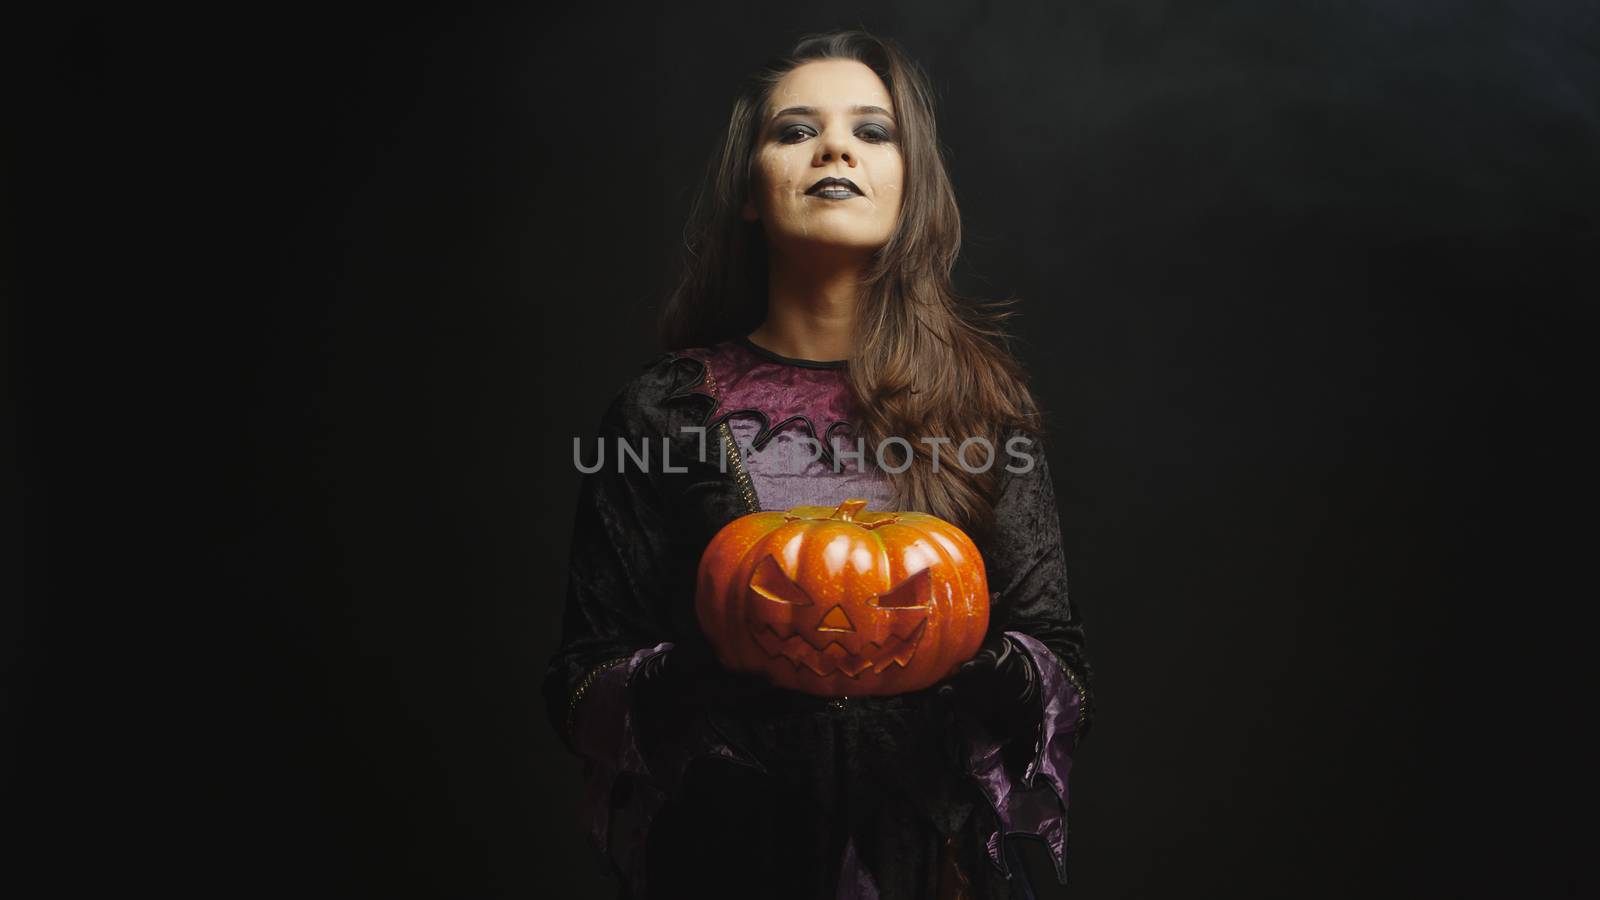 Beautiful young woman with evil face dressed up like a witch by DCStudio